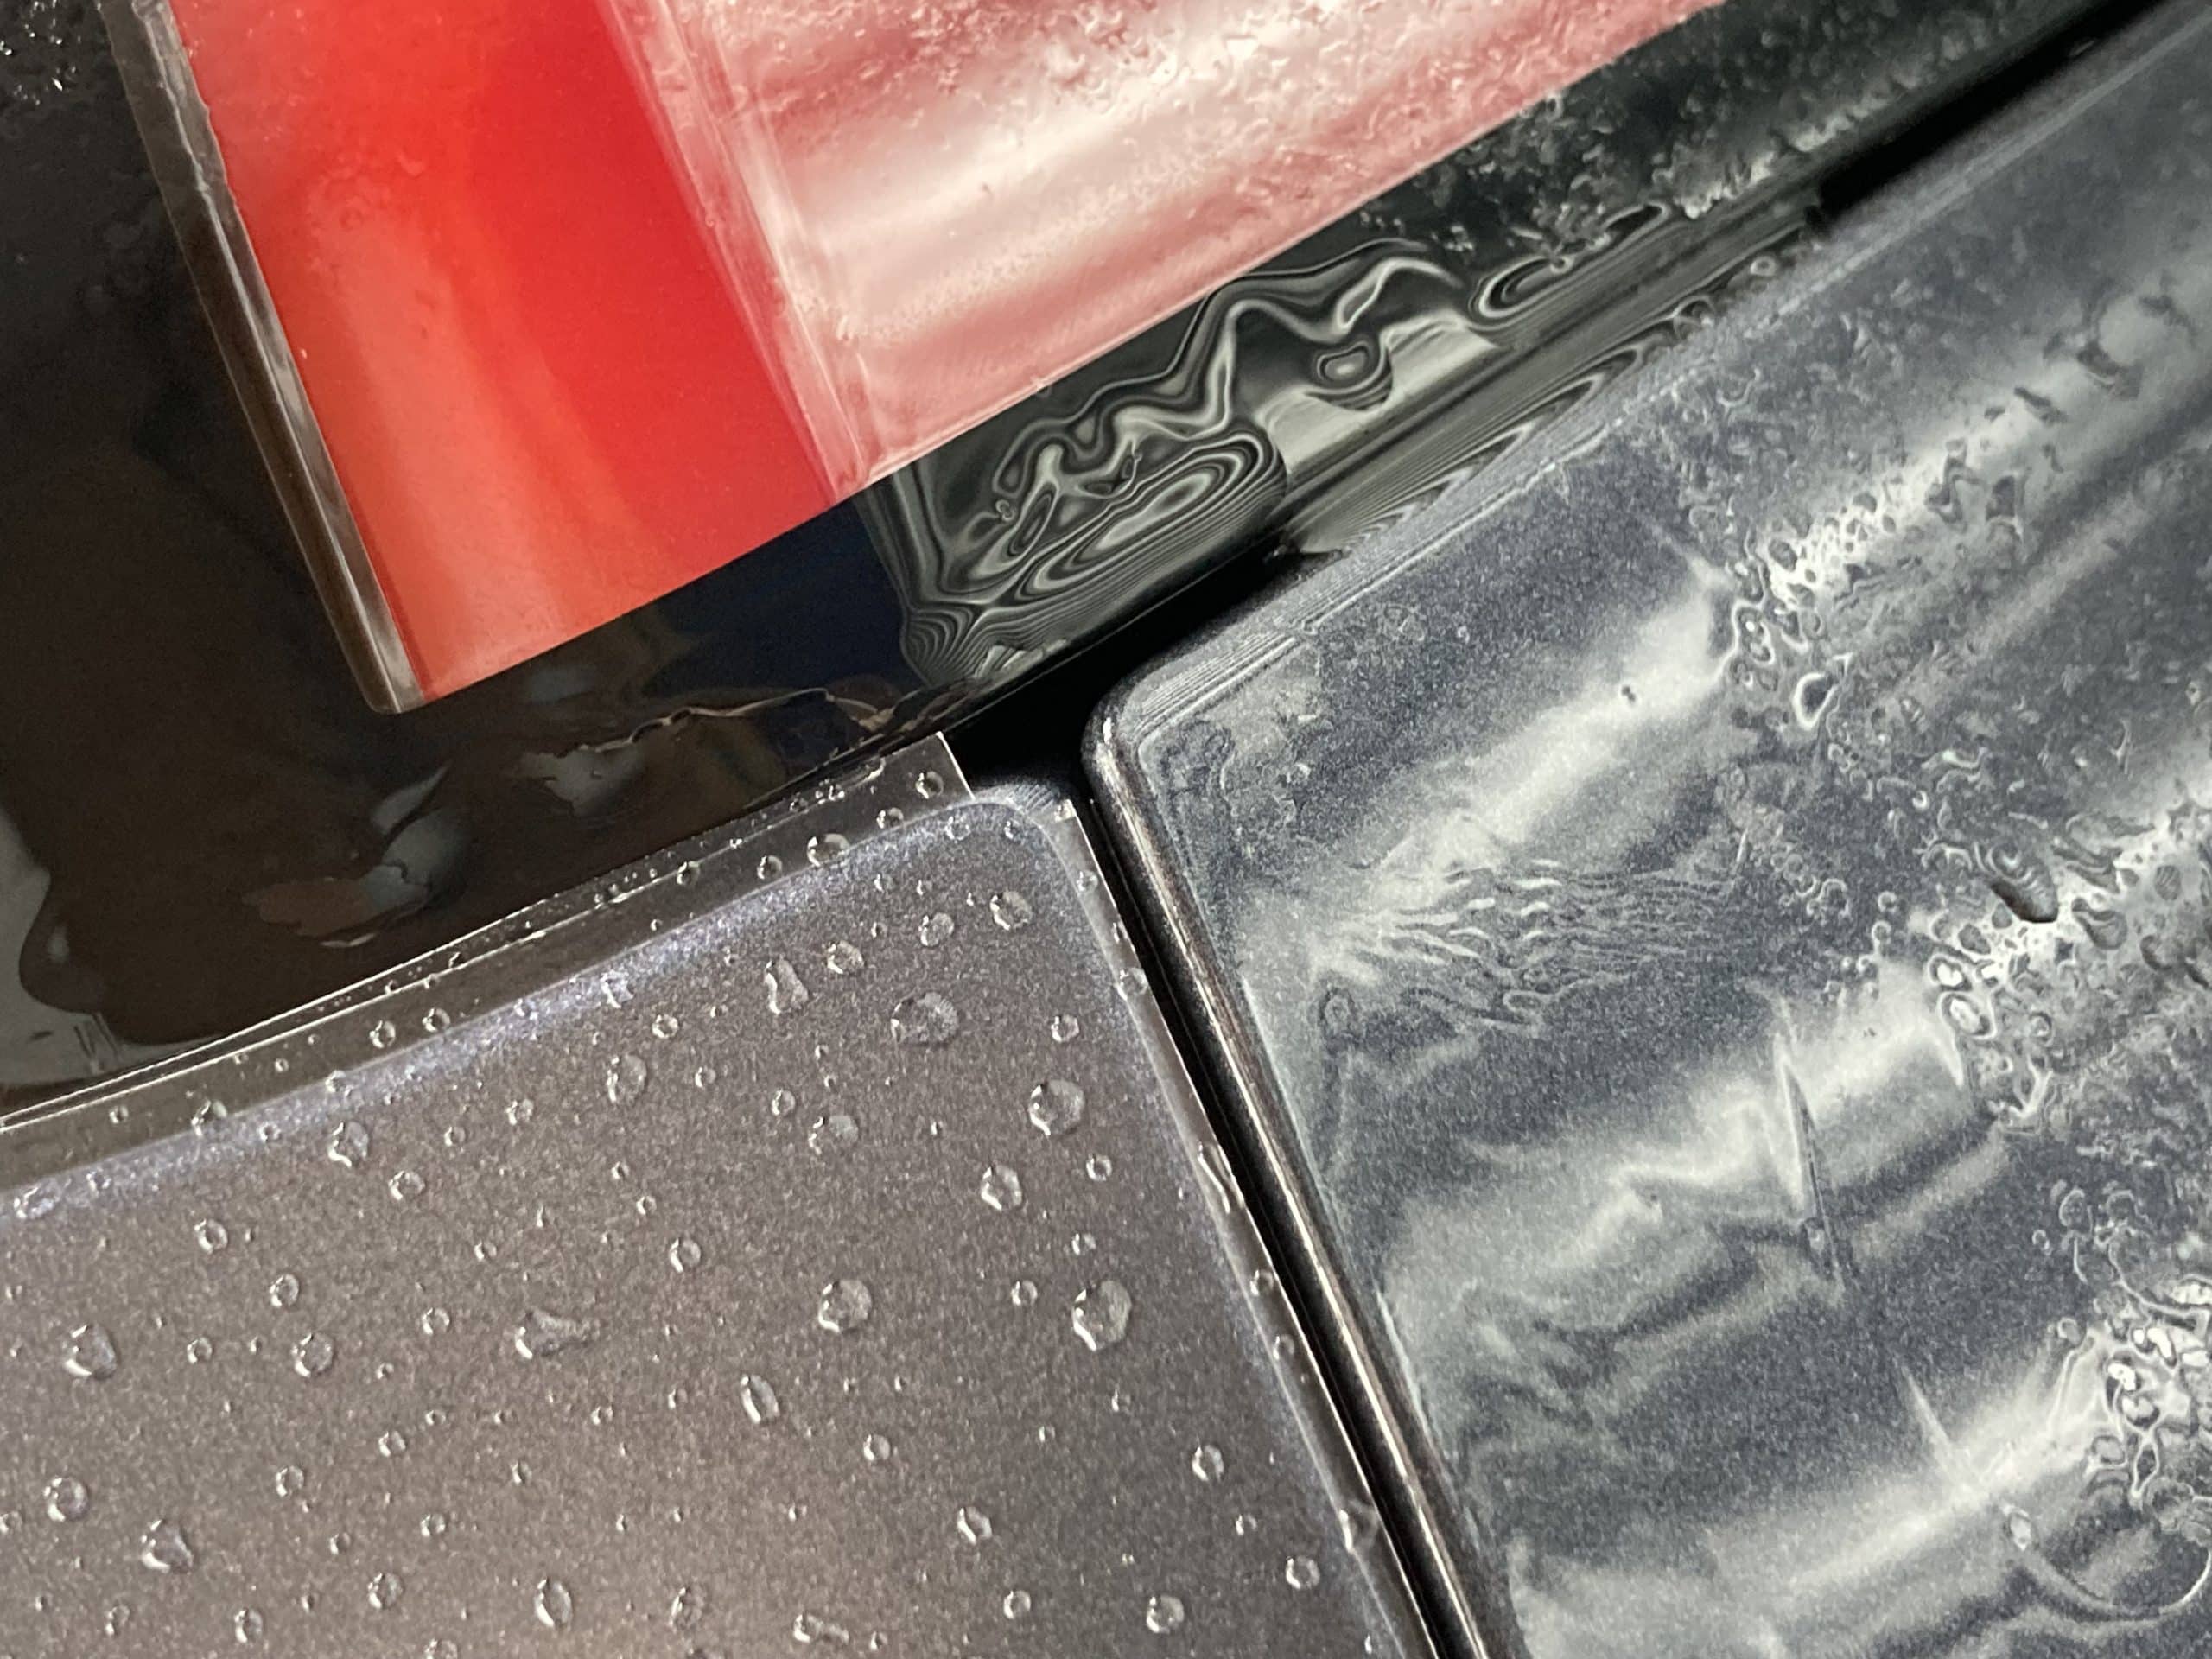 Close-up of water droplets on the surfaces of overlapping sheets of glossy material, with shades of red, black, and gray, showcasing the precision of ceramic coating in car detailing.